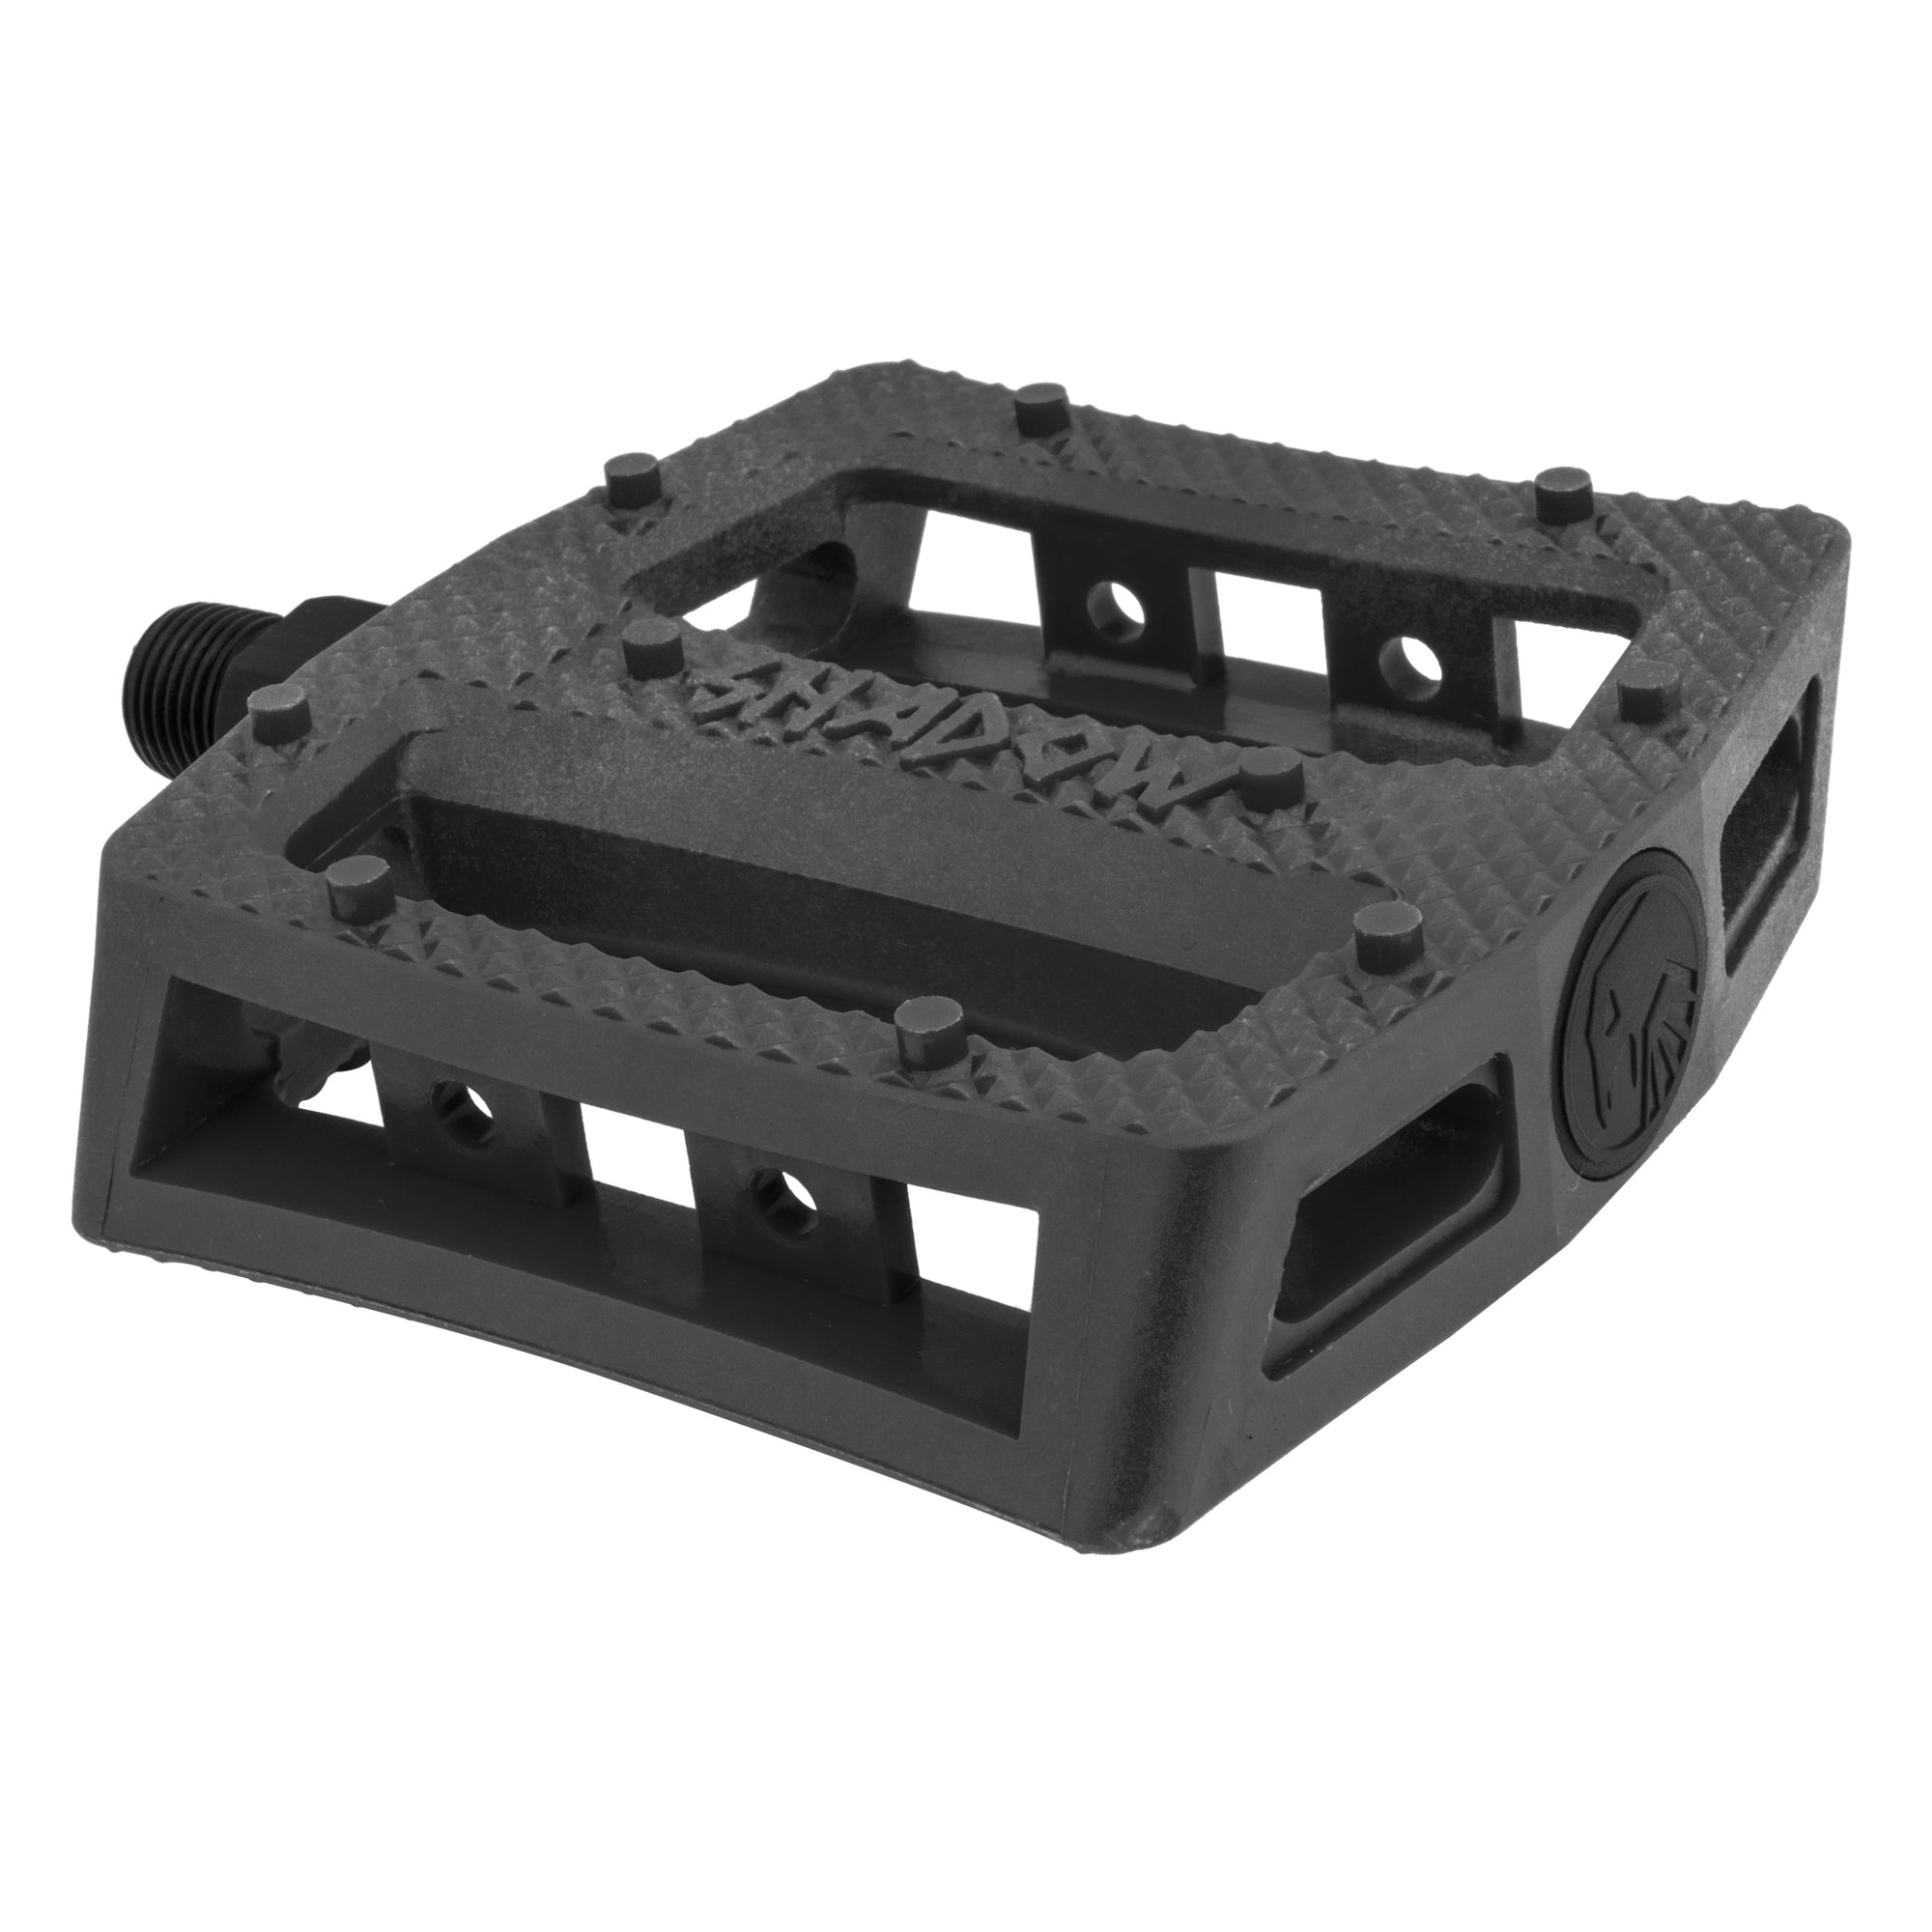 The Shadow Conspiracy Ravager PC Platform Pedals - 9/16" - Black